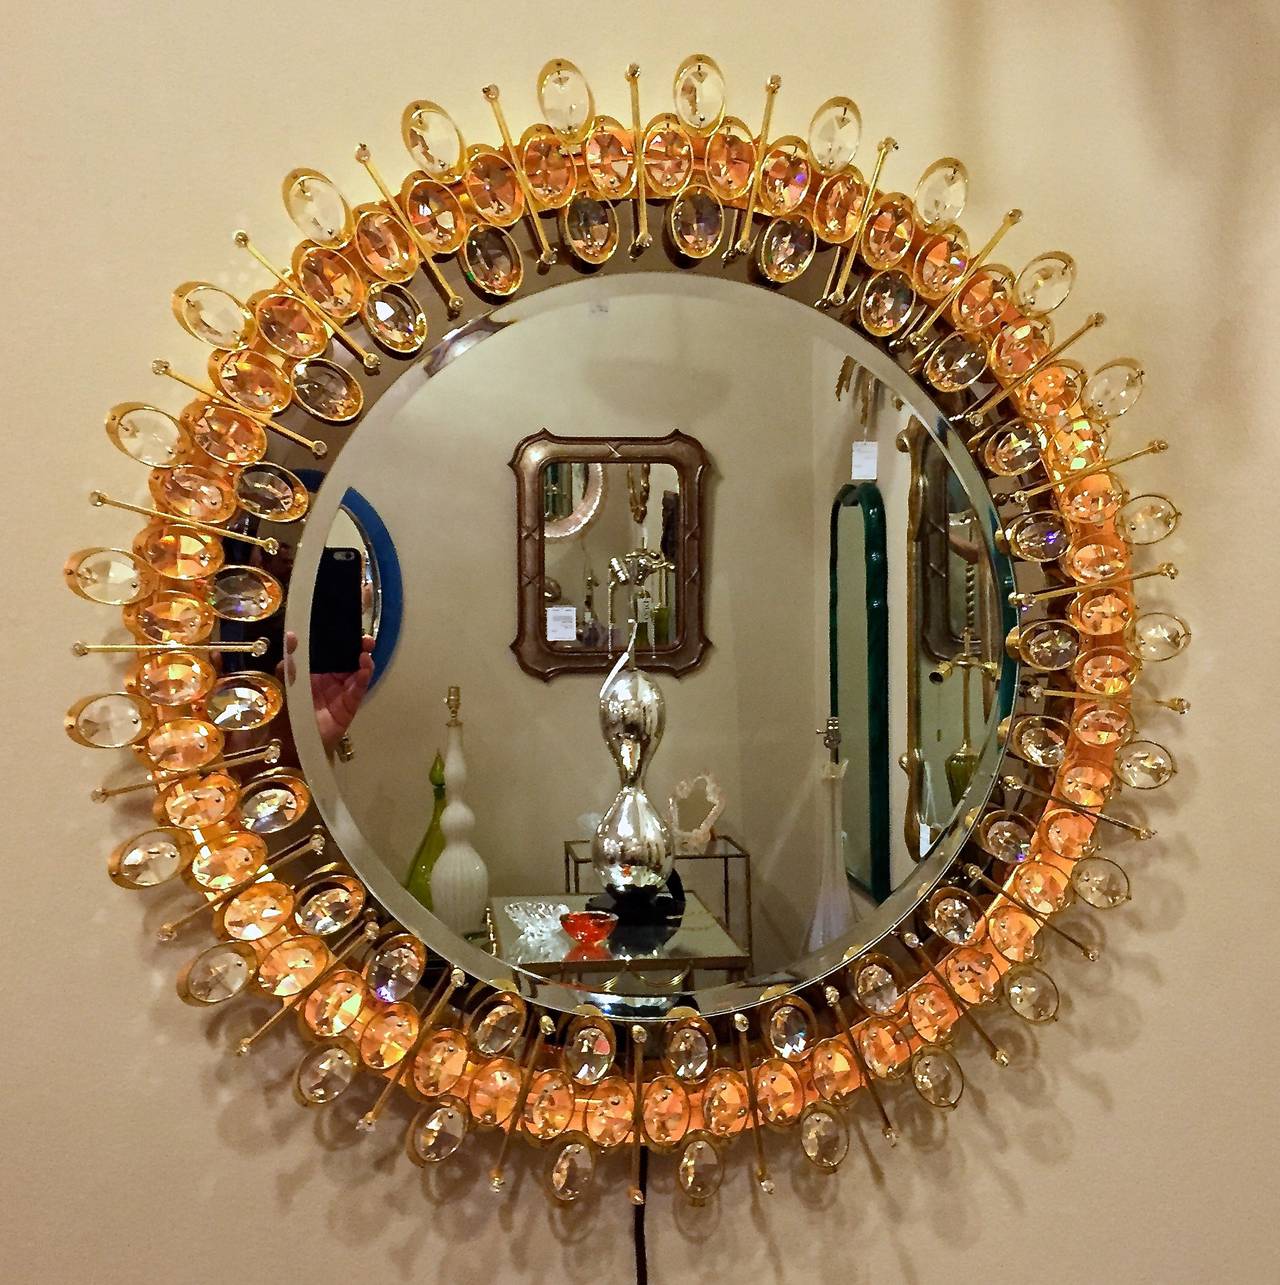 A stunning and rare round gold-plated and crystal illuminated backlit wall mirror by Lobmeyr. Incredible quality. Grey mirror surrounds clear mirror. Polished and matte gold plated finish on brass frame. Rewired.